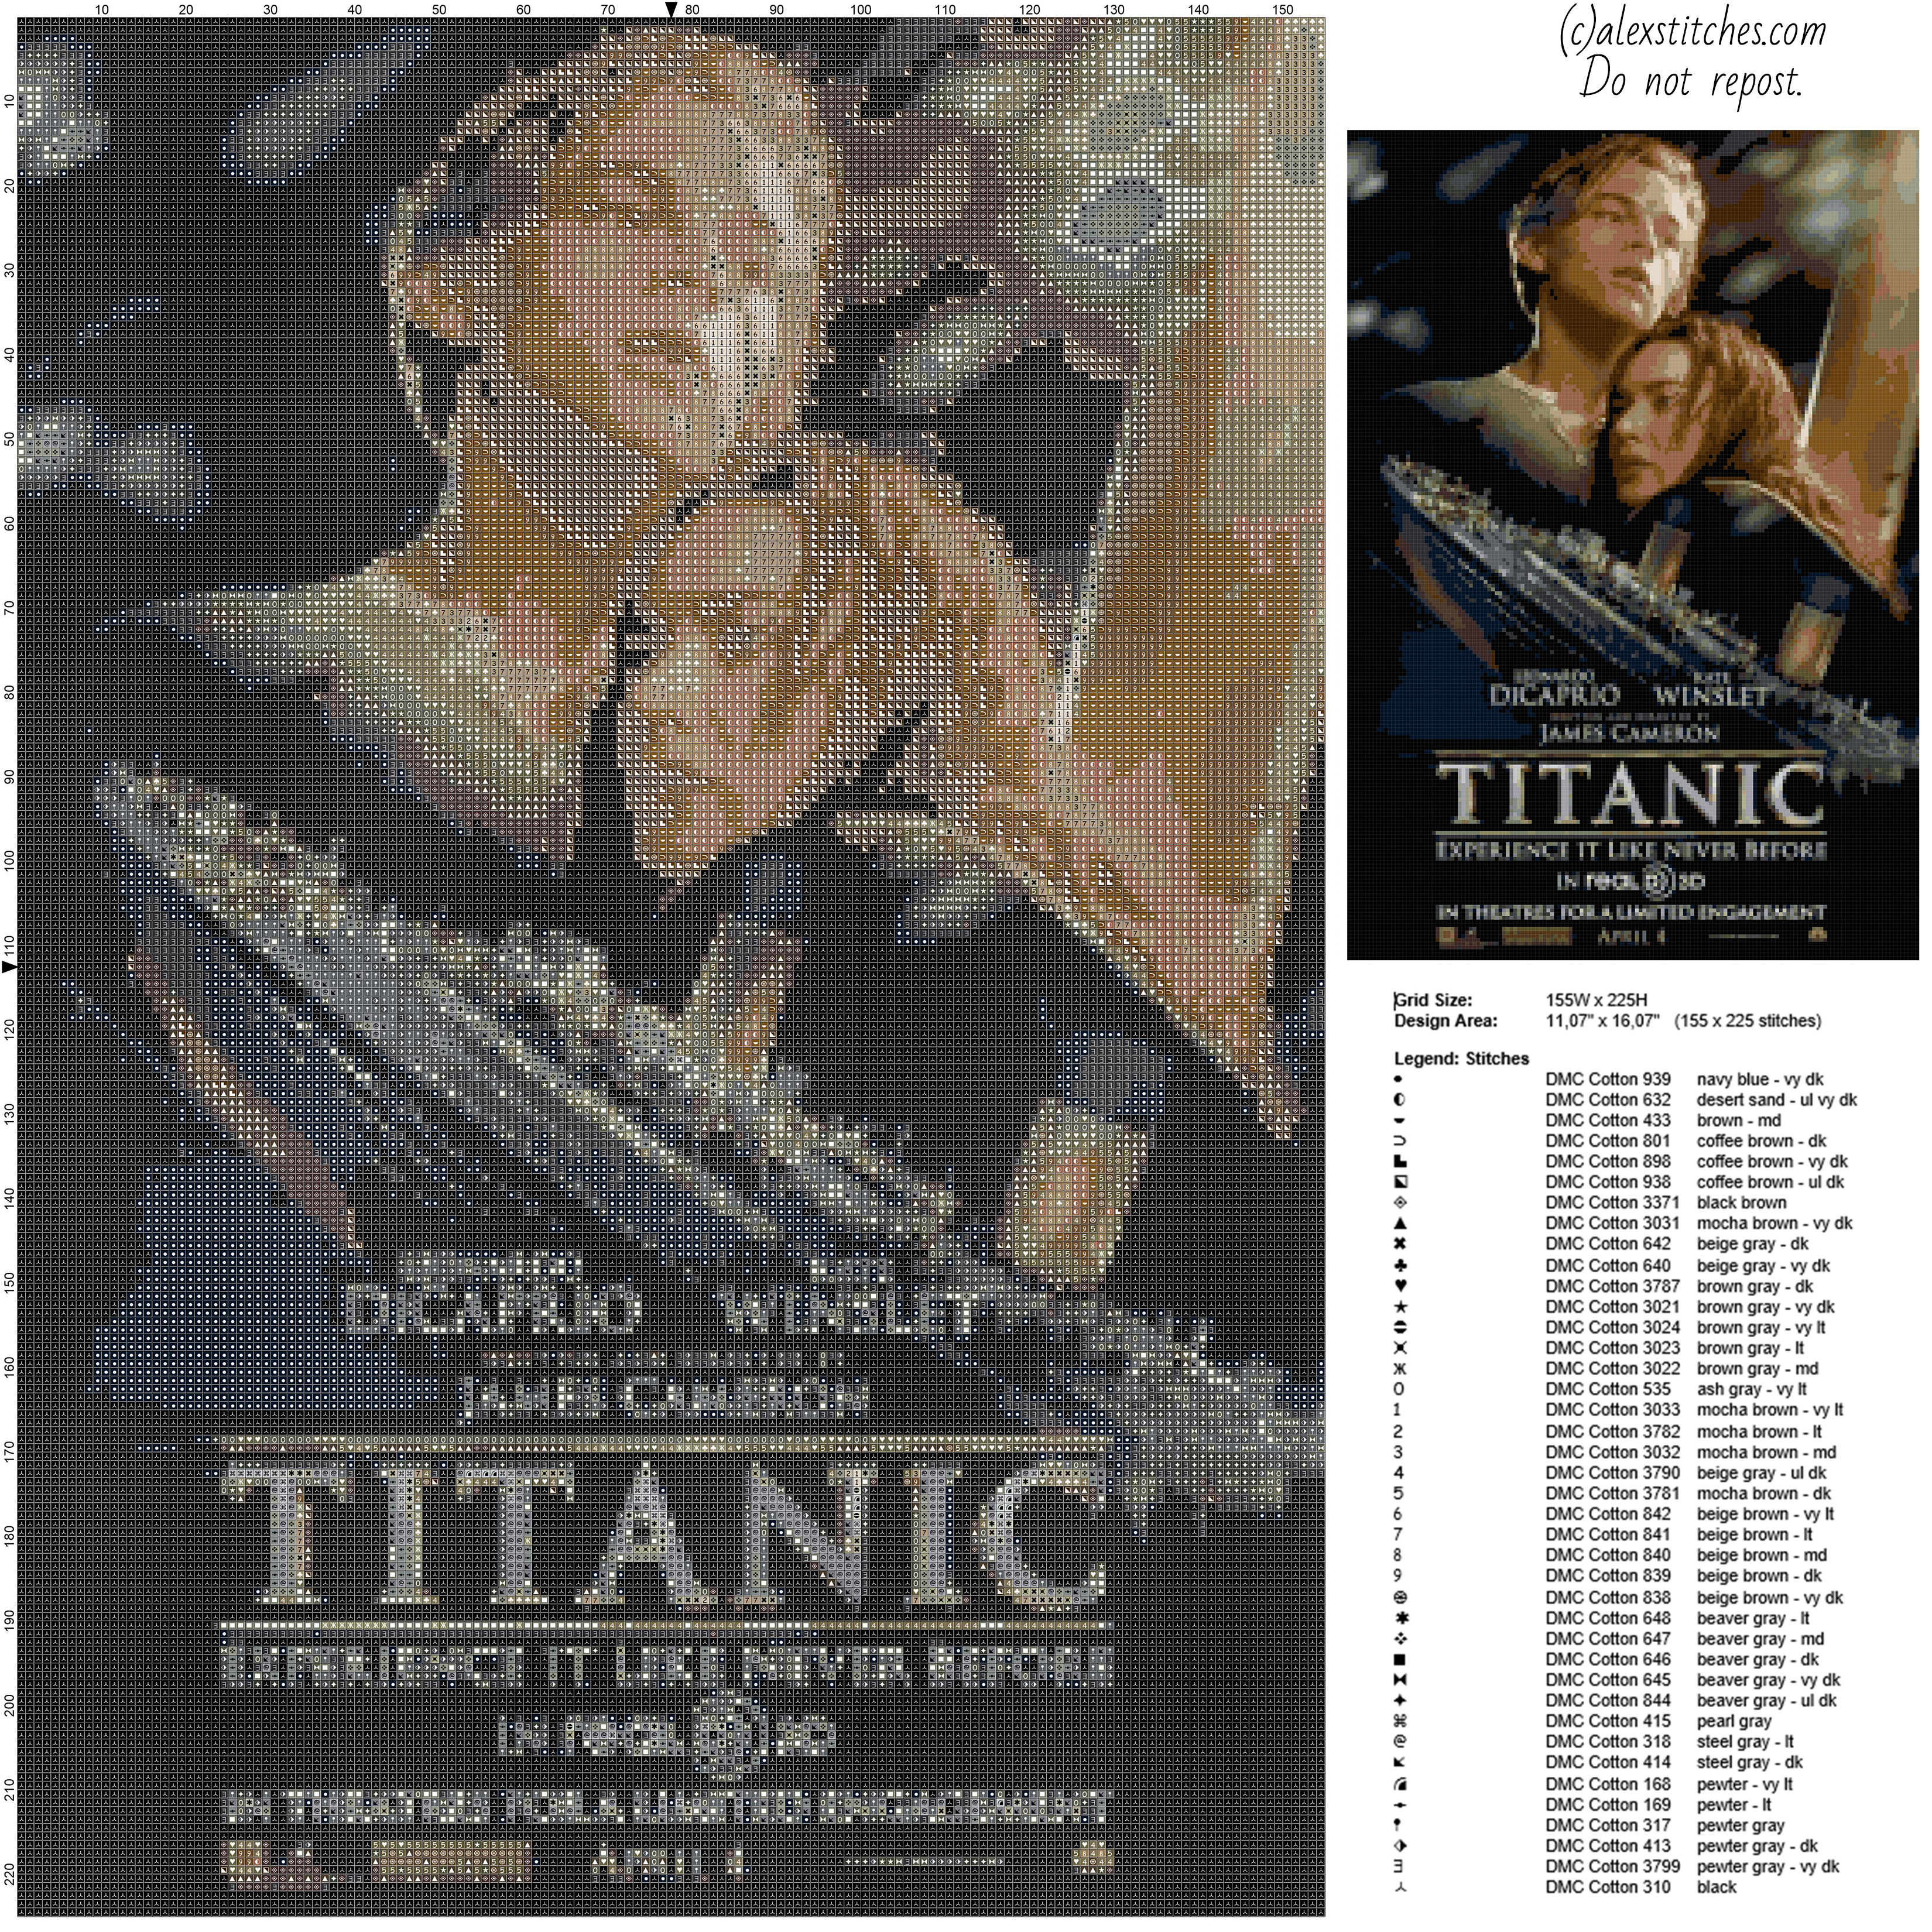 Titanic film poster free cross stitch pattern made with pcstitch software